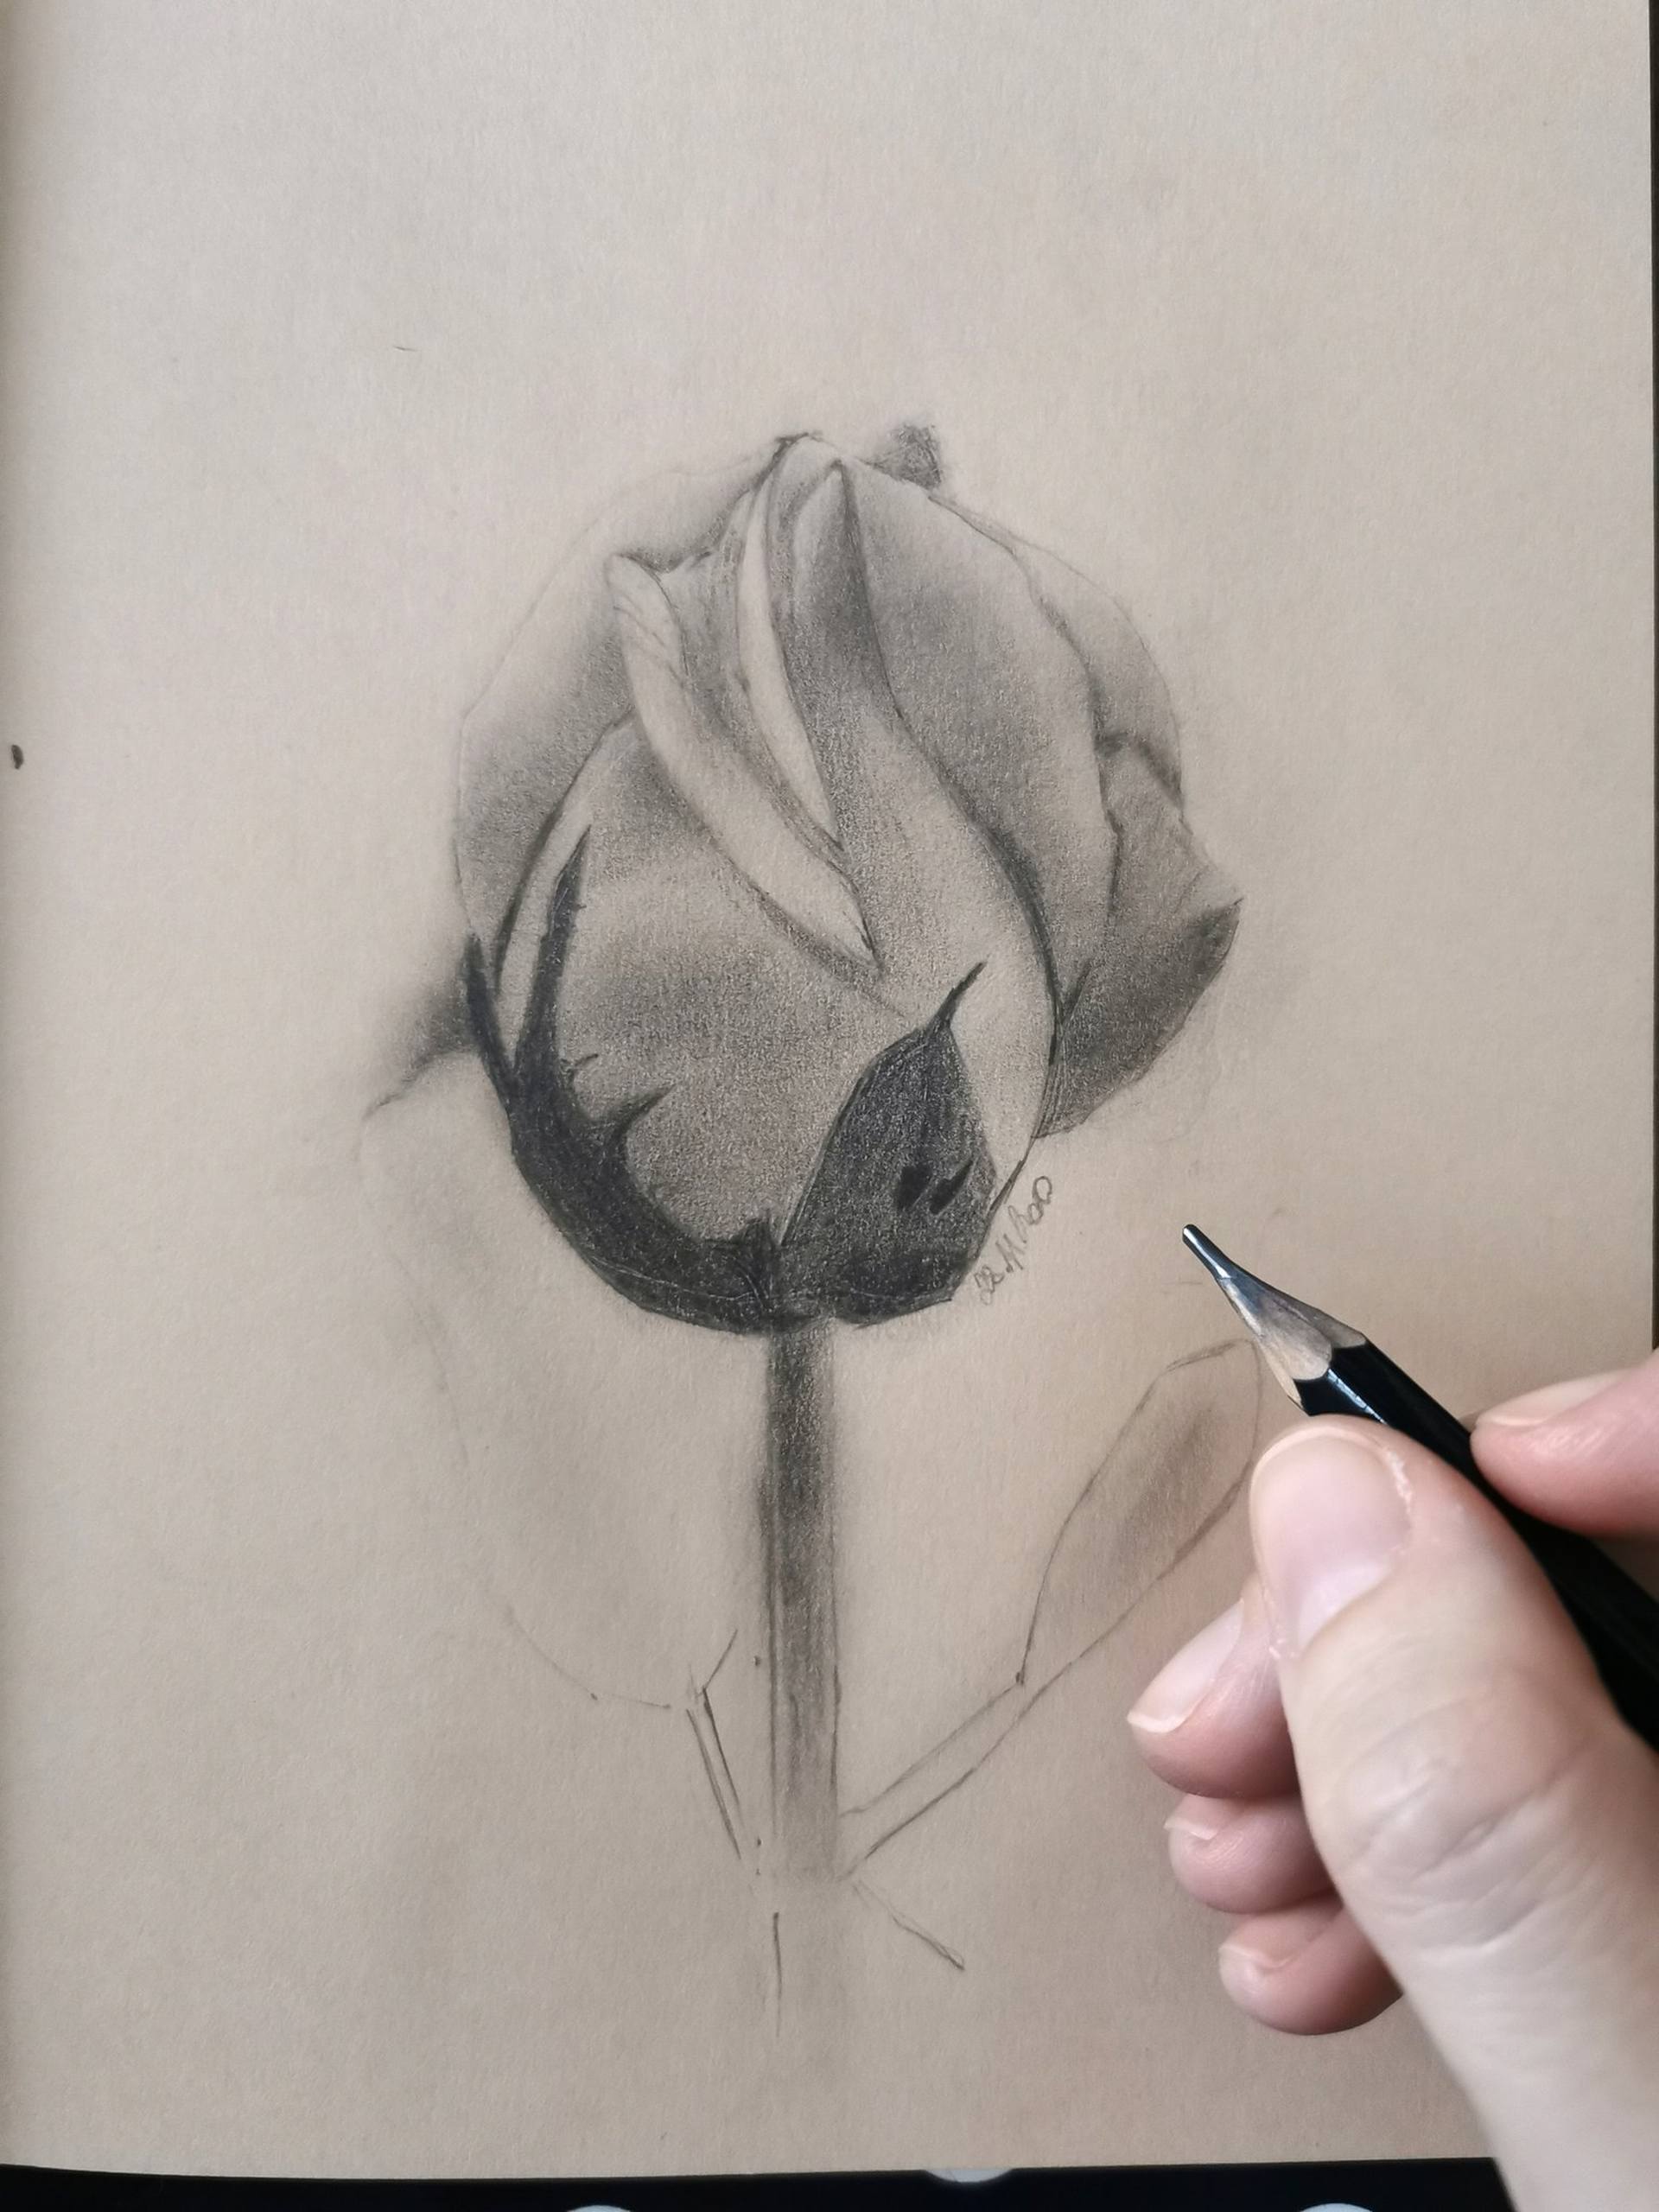 Roses Pencil Drawing 1 Drawing by Matthew Hack - Pixels-saigonsouth.com.vn